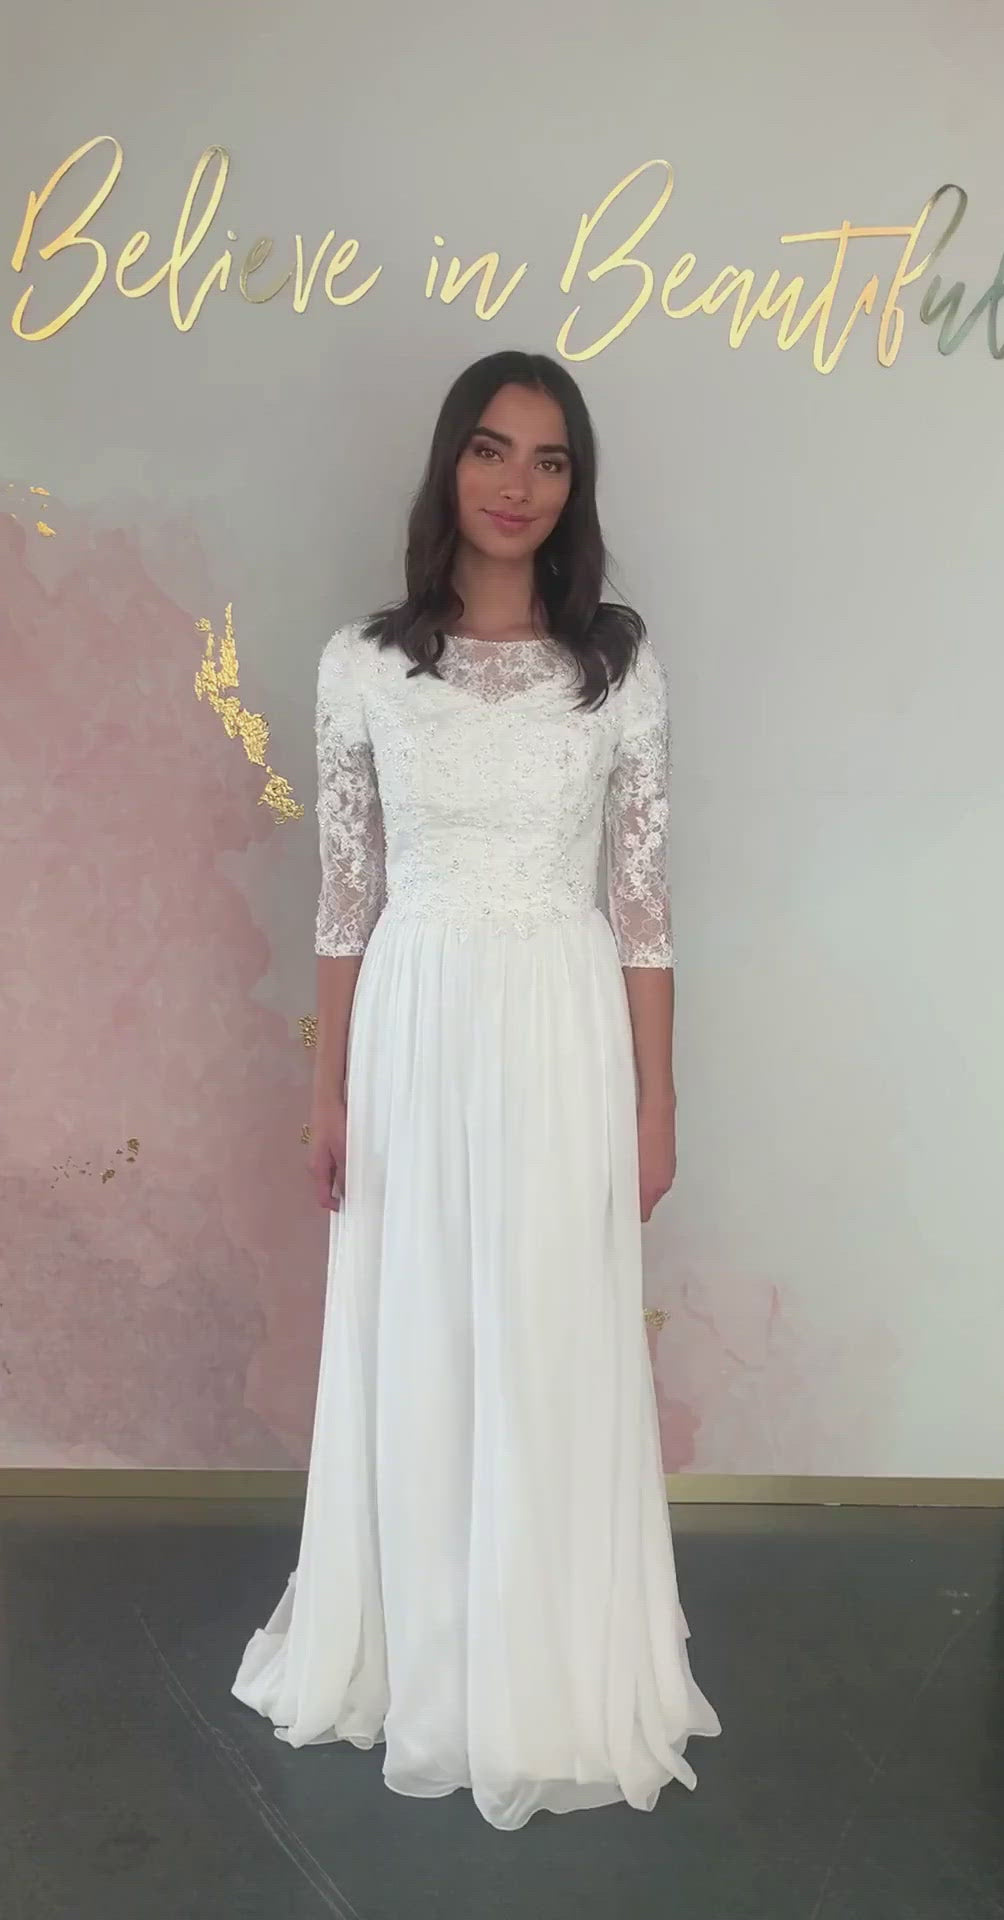 A video featuring our Quentin wedding dress and it's beaded applique bodice, illusion neckline, sheer sleeves, and flowy chiffon skirt.